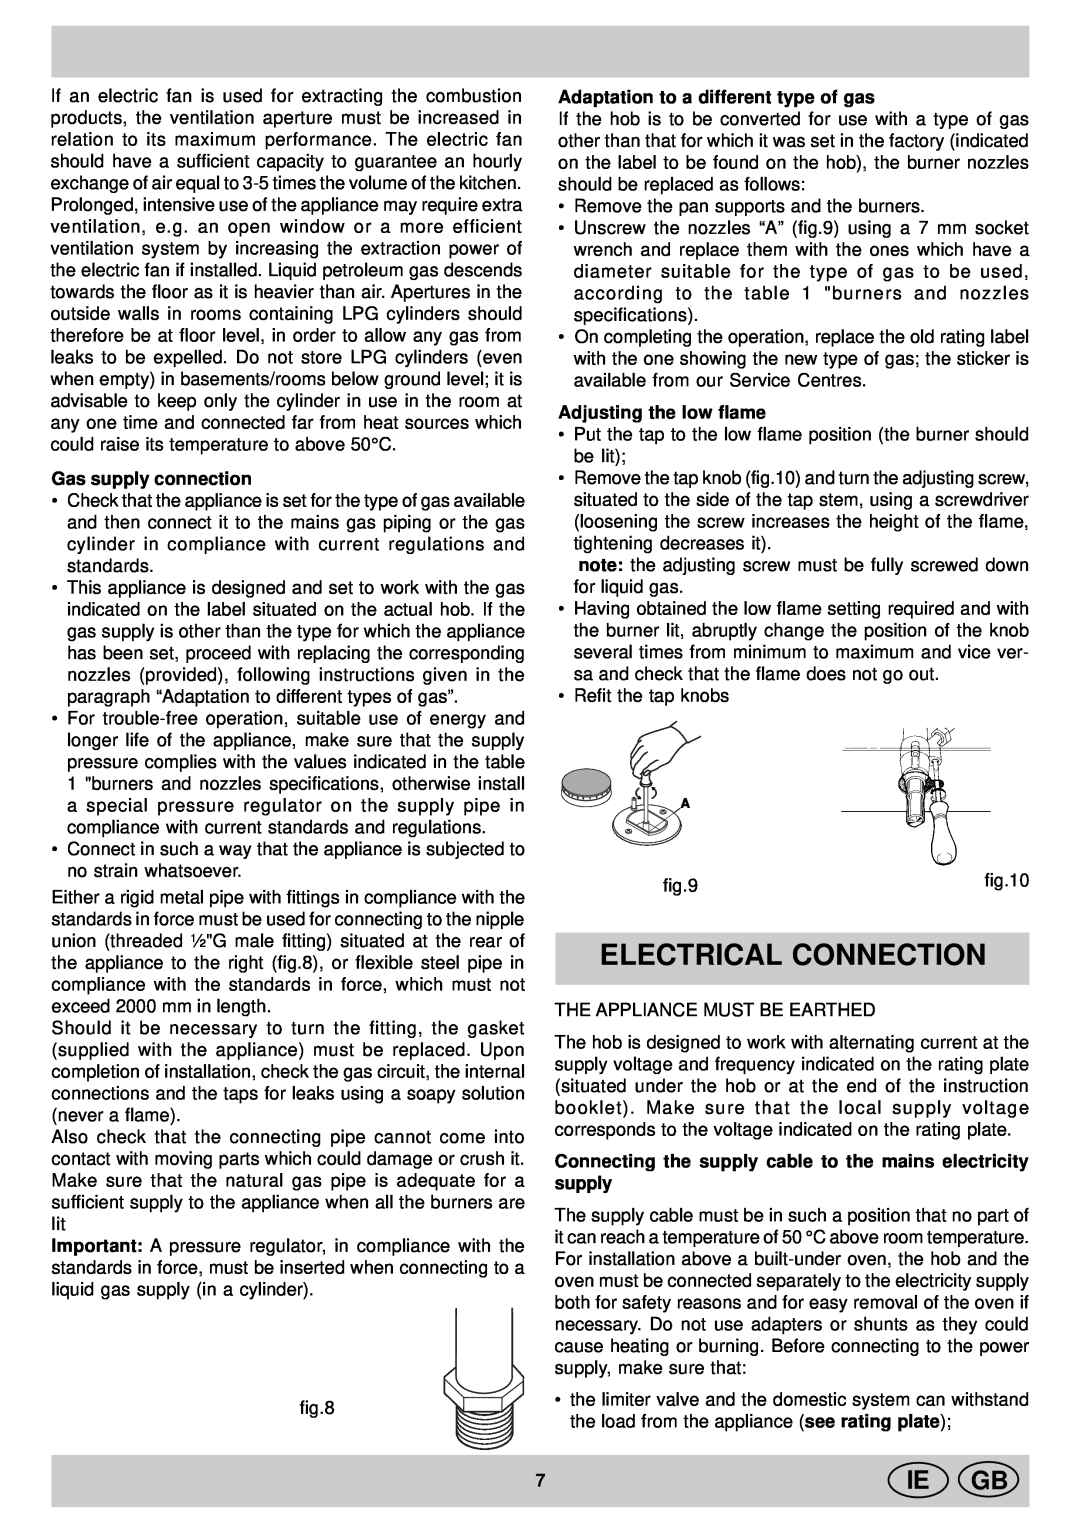 Indesit KP9507EB manual Electrical Connection, Ie Gb, Gas supply connection, Adaptation to a different type of gas 